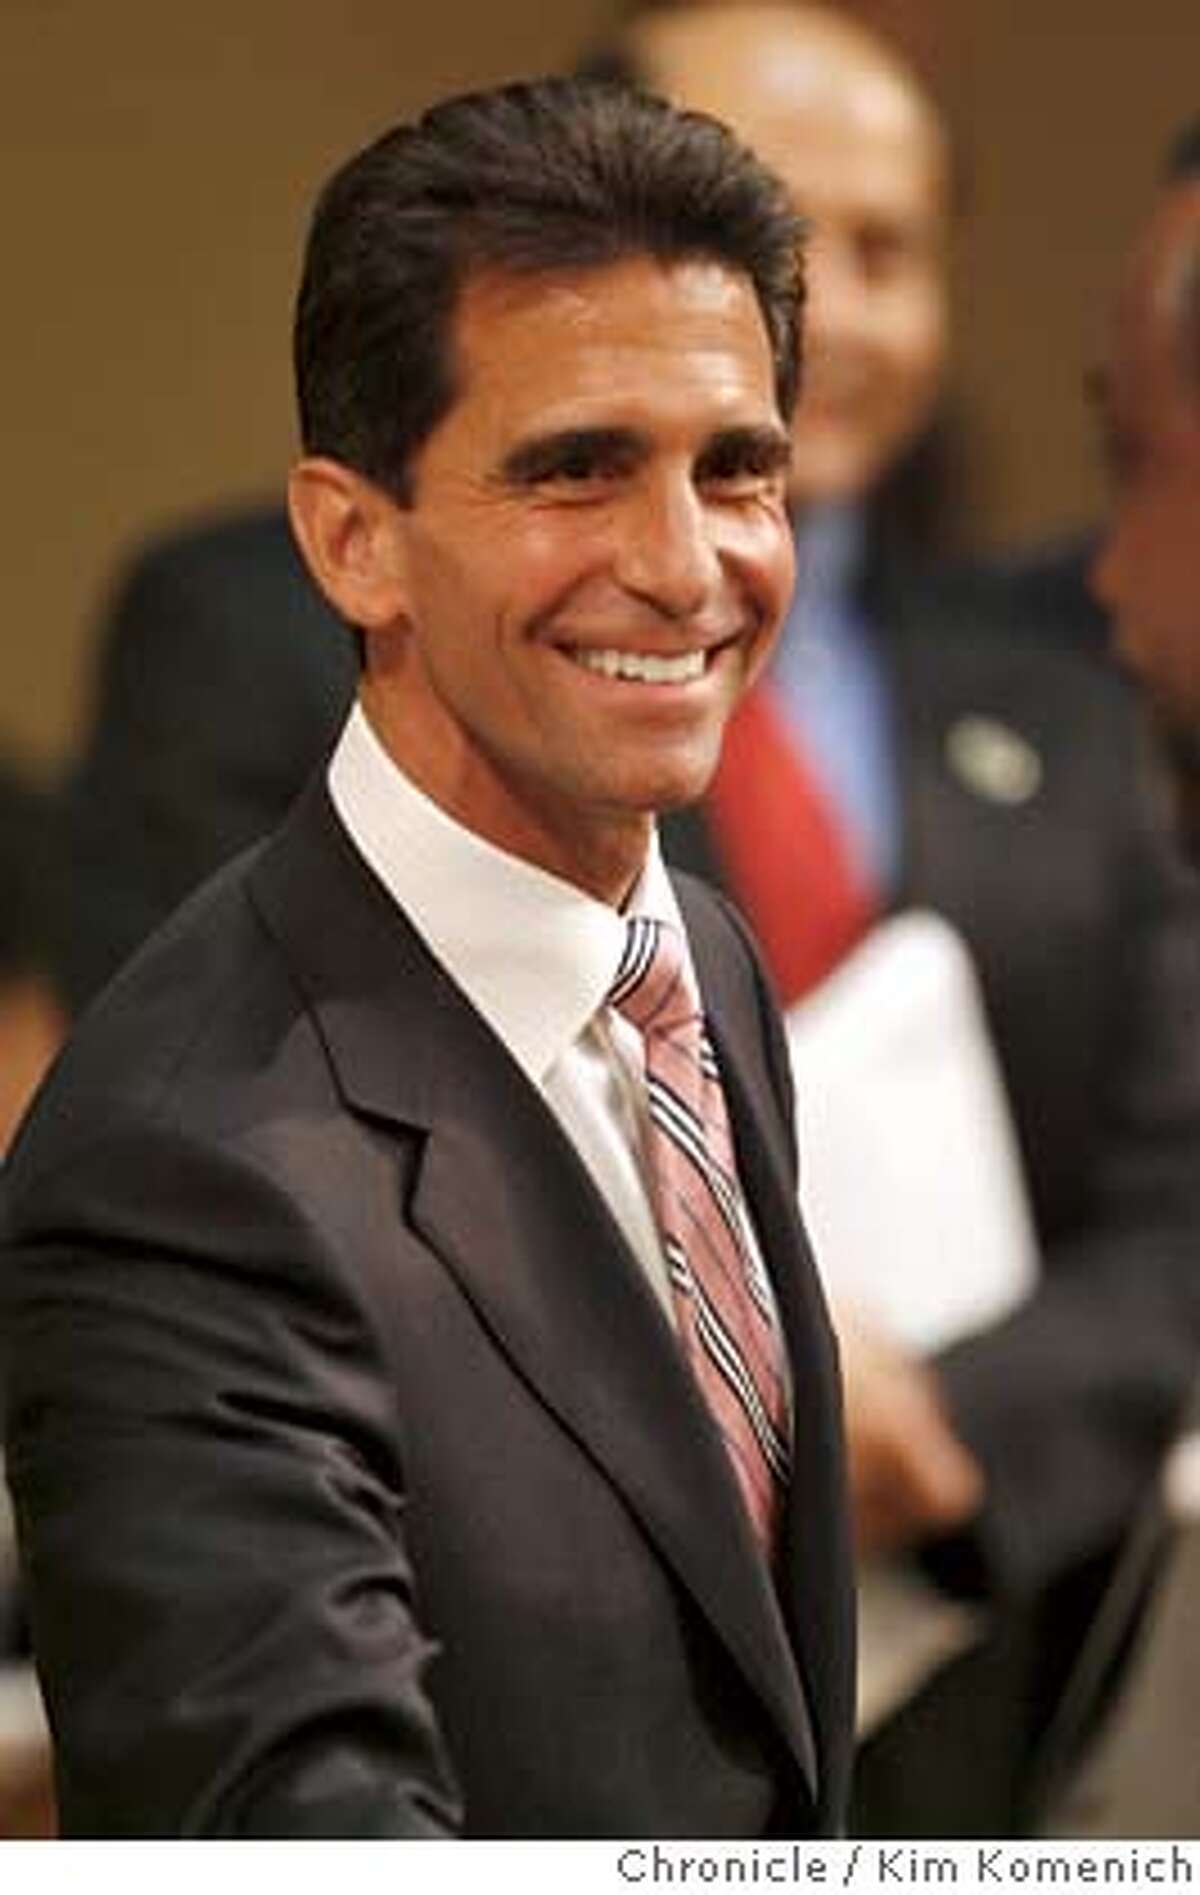 SCHWARZENEGGER10_110_KK.JPG California State Assemblyman Mark Leno on the Asssembly floor before California Gov. Arnold Schwarzenegger gives the 2007 State of the State Address. Photo by Kim Komenich/The Chronicle Ran on: 03-17-2007 State Sen. Carole Migden is seeking a second four-year term in the upper house. Ran on: 03-17-2007 State Sen. Carole Migden is seeking a second four-year term in the upper house. Ran on: 04-23-2007 S.F. lawmakers Mark Leno, left, and Carole Midgen, right, said they are working to make the city safe for immigrants. ALSO Ran on: 04-23-2007 S.F. lawmakers Mark Leno, left, and Carole Midgen, right, said they are working to make the city safe for immigrants. ALSO Ran on: 09-08-2007 Assemblyman Mark Leno authored two previous bills that would have legalized same-sex marriage. ALSO Ran on: 09-17-2007 Assemblyman Mark Leno sponsored the bill approved this month. ALSO Ran on: 11-18-2007 Mayor Gavin Newsom and Supervisors President Aaron Peskin confer in January. They now dont see eye to eye on trip to China. �2007, San Francisco Chronicle/Kim Komenich MANDATORY CREDIT FOR PHOTOG AND SAN FRANCISCO CHRONICLE/NO SALES-MAGS OUT